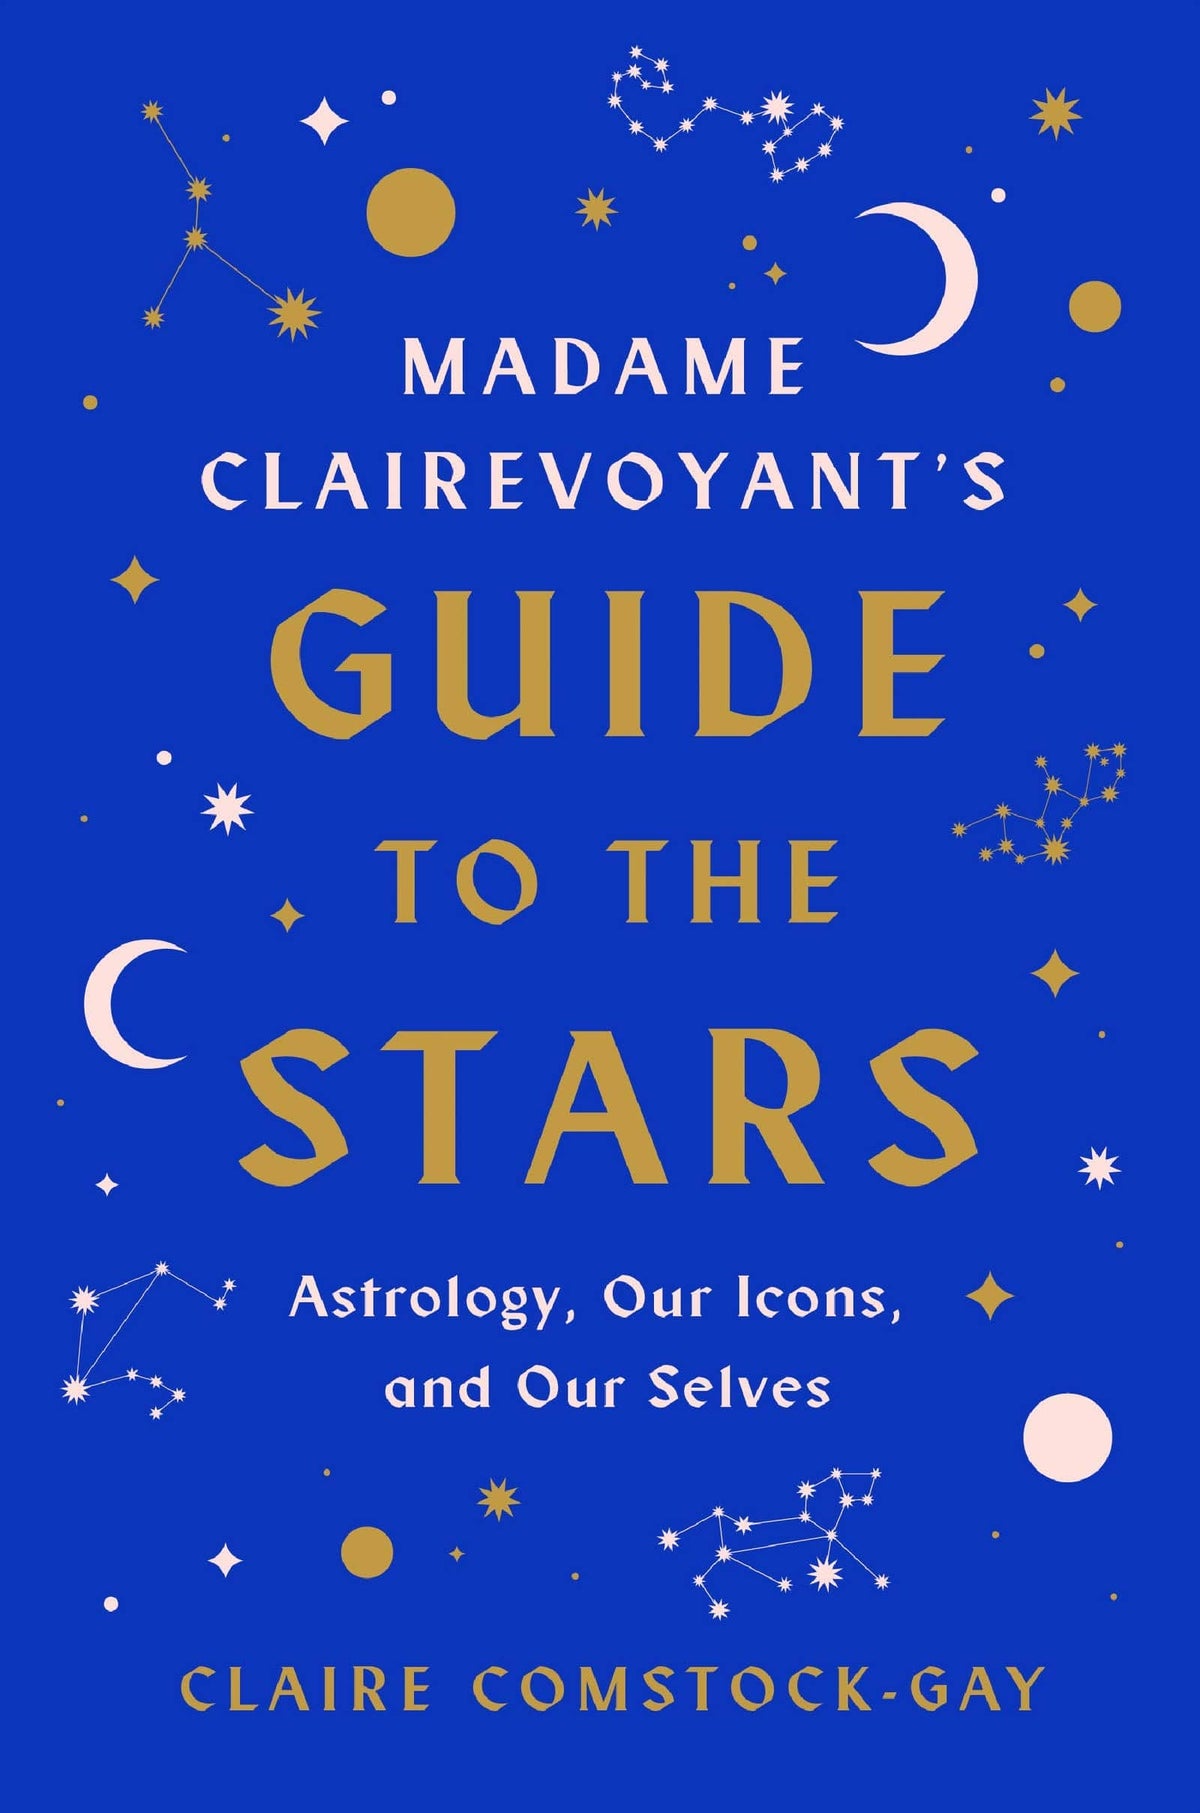 Madame Clairevoyant's Guide to the Stars: Astrology, Our Icons, and Our Selves - Hardcover